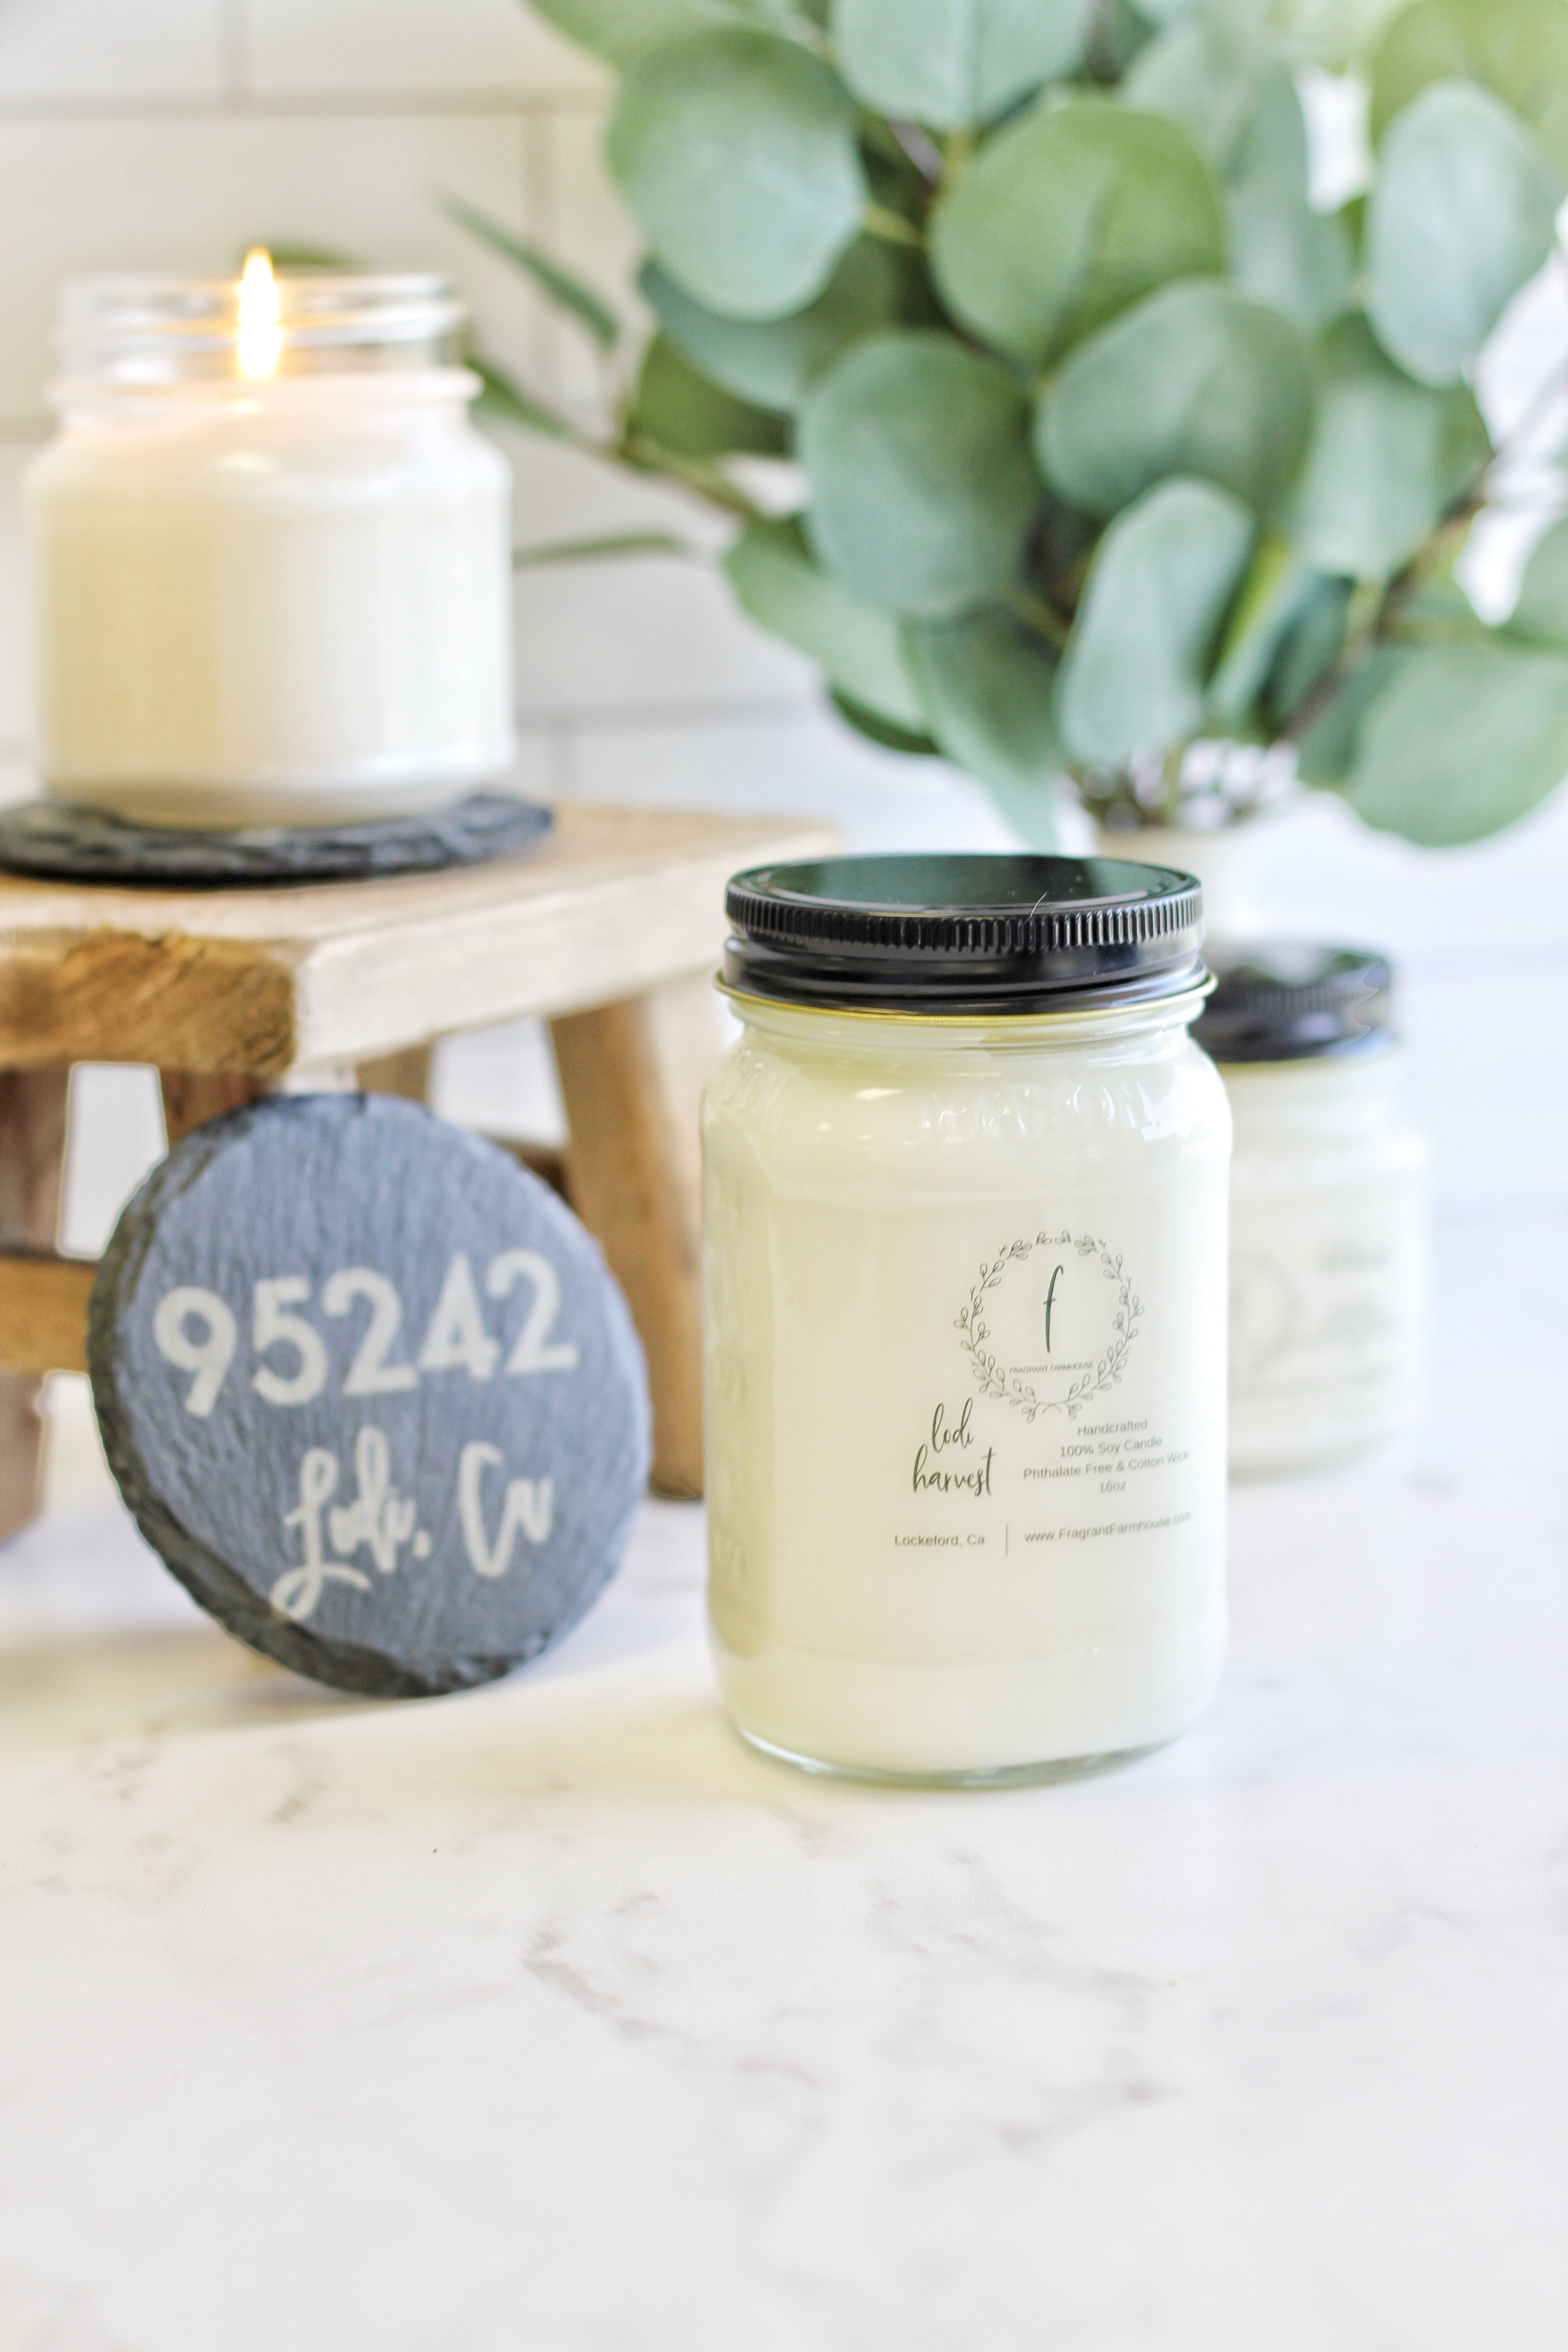 Harvest Wine Cellar: Milkhouse Candle Co. Soy Candle or Wax Melts